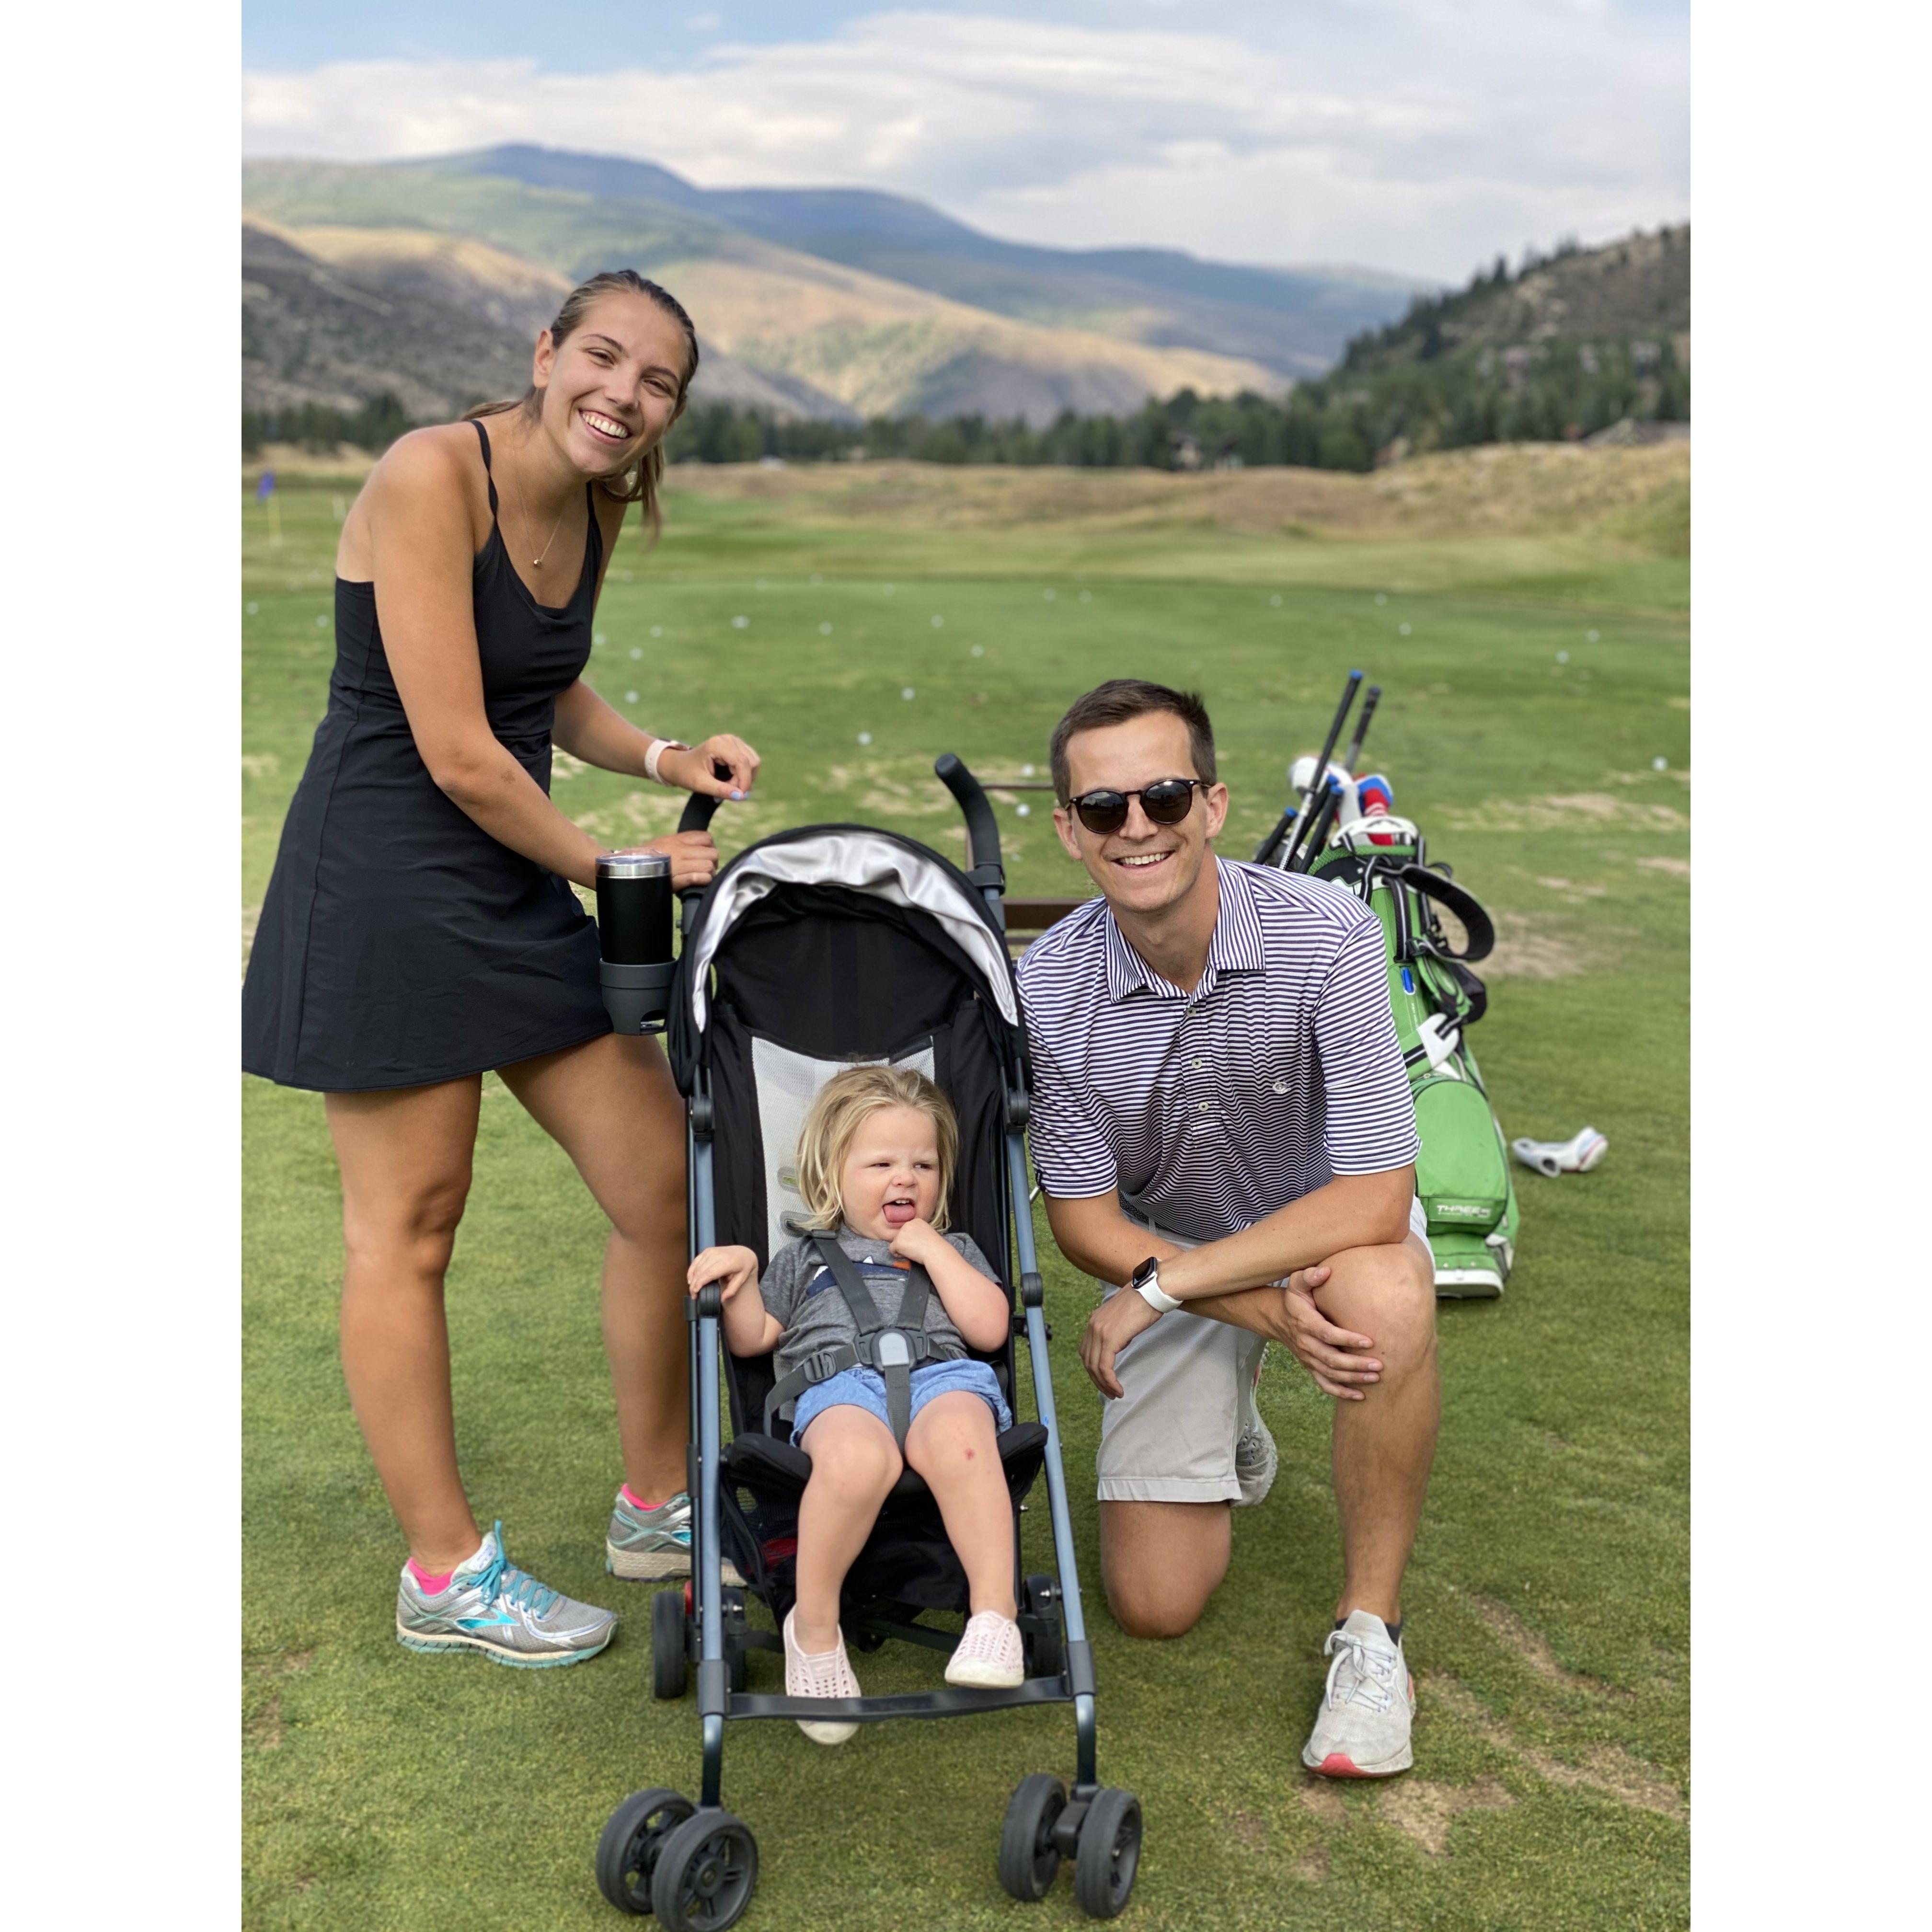 August 2020 - Luke and Amanda worked remotely from CO for three weeks, which meant extra time with family (including Cora, Luke's goddaughter!)